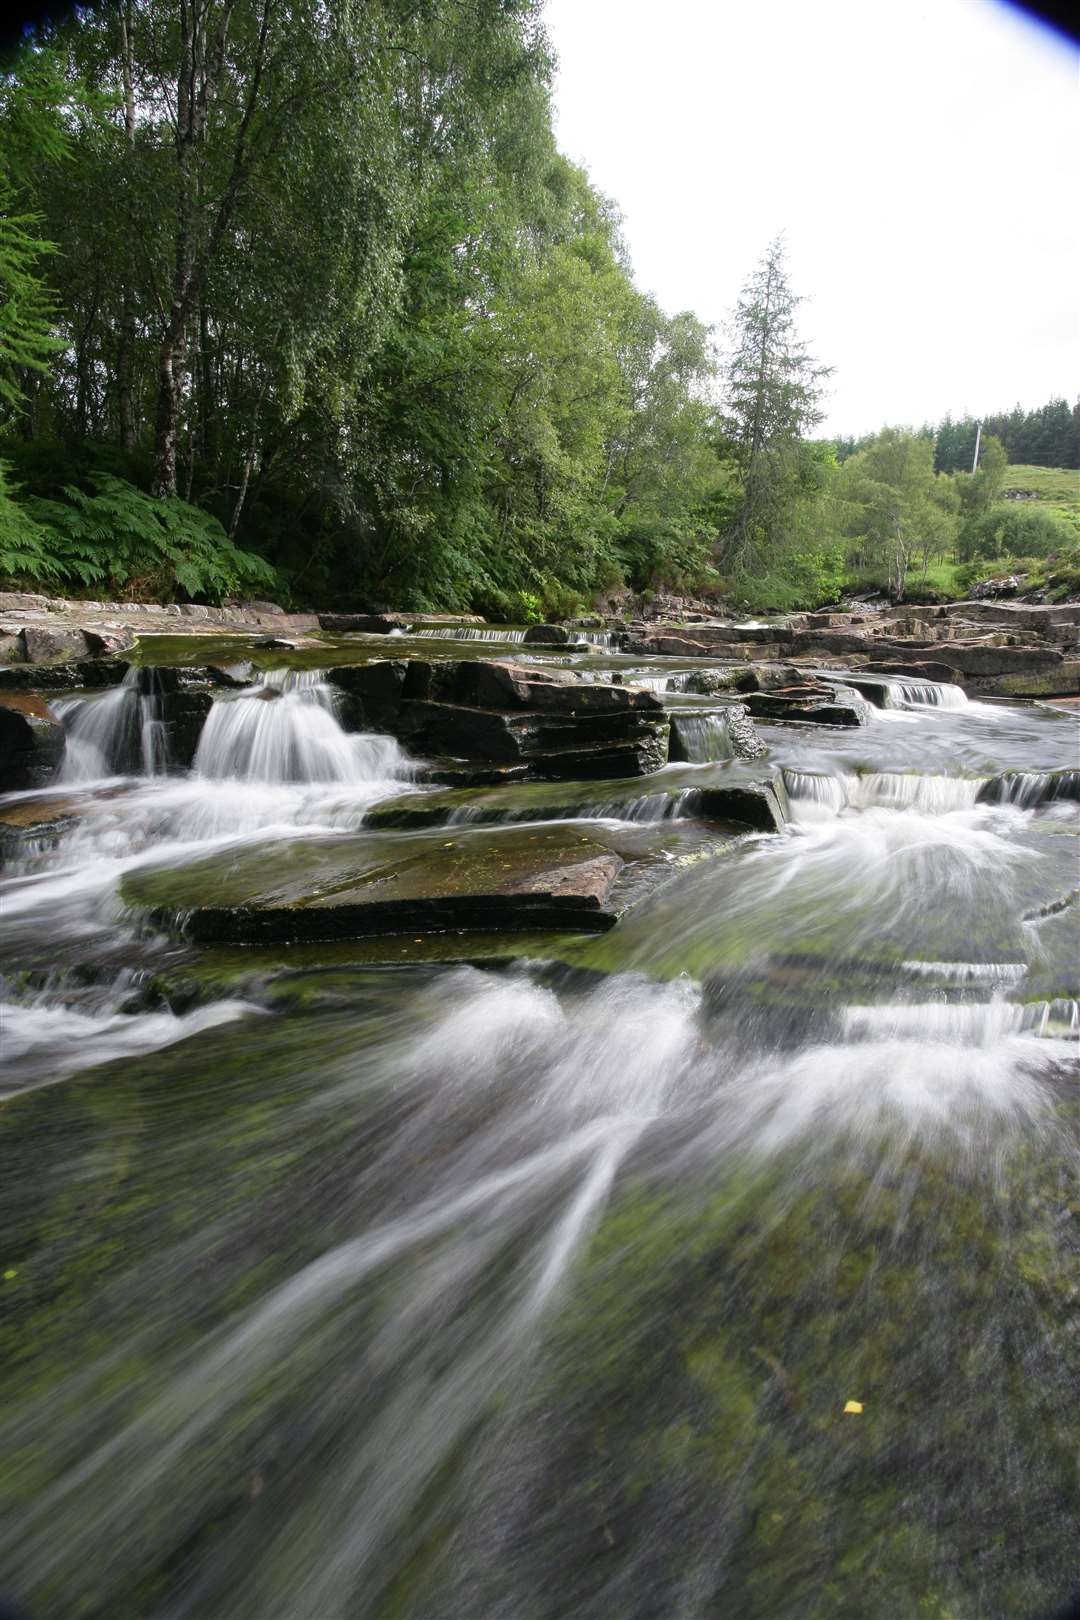 The gorge and surrounding area is a popular attraction. Picture: NTS